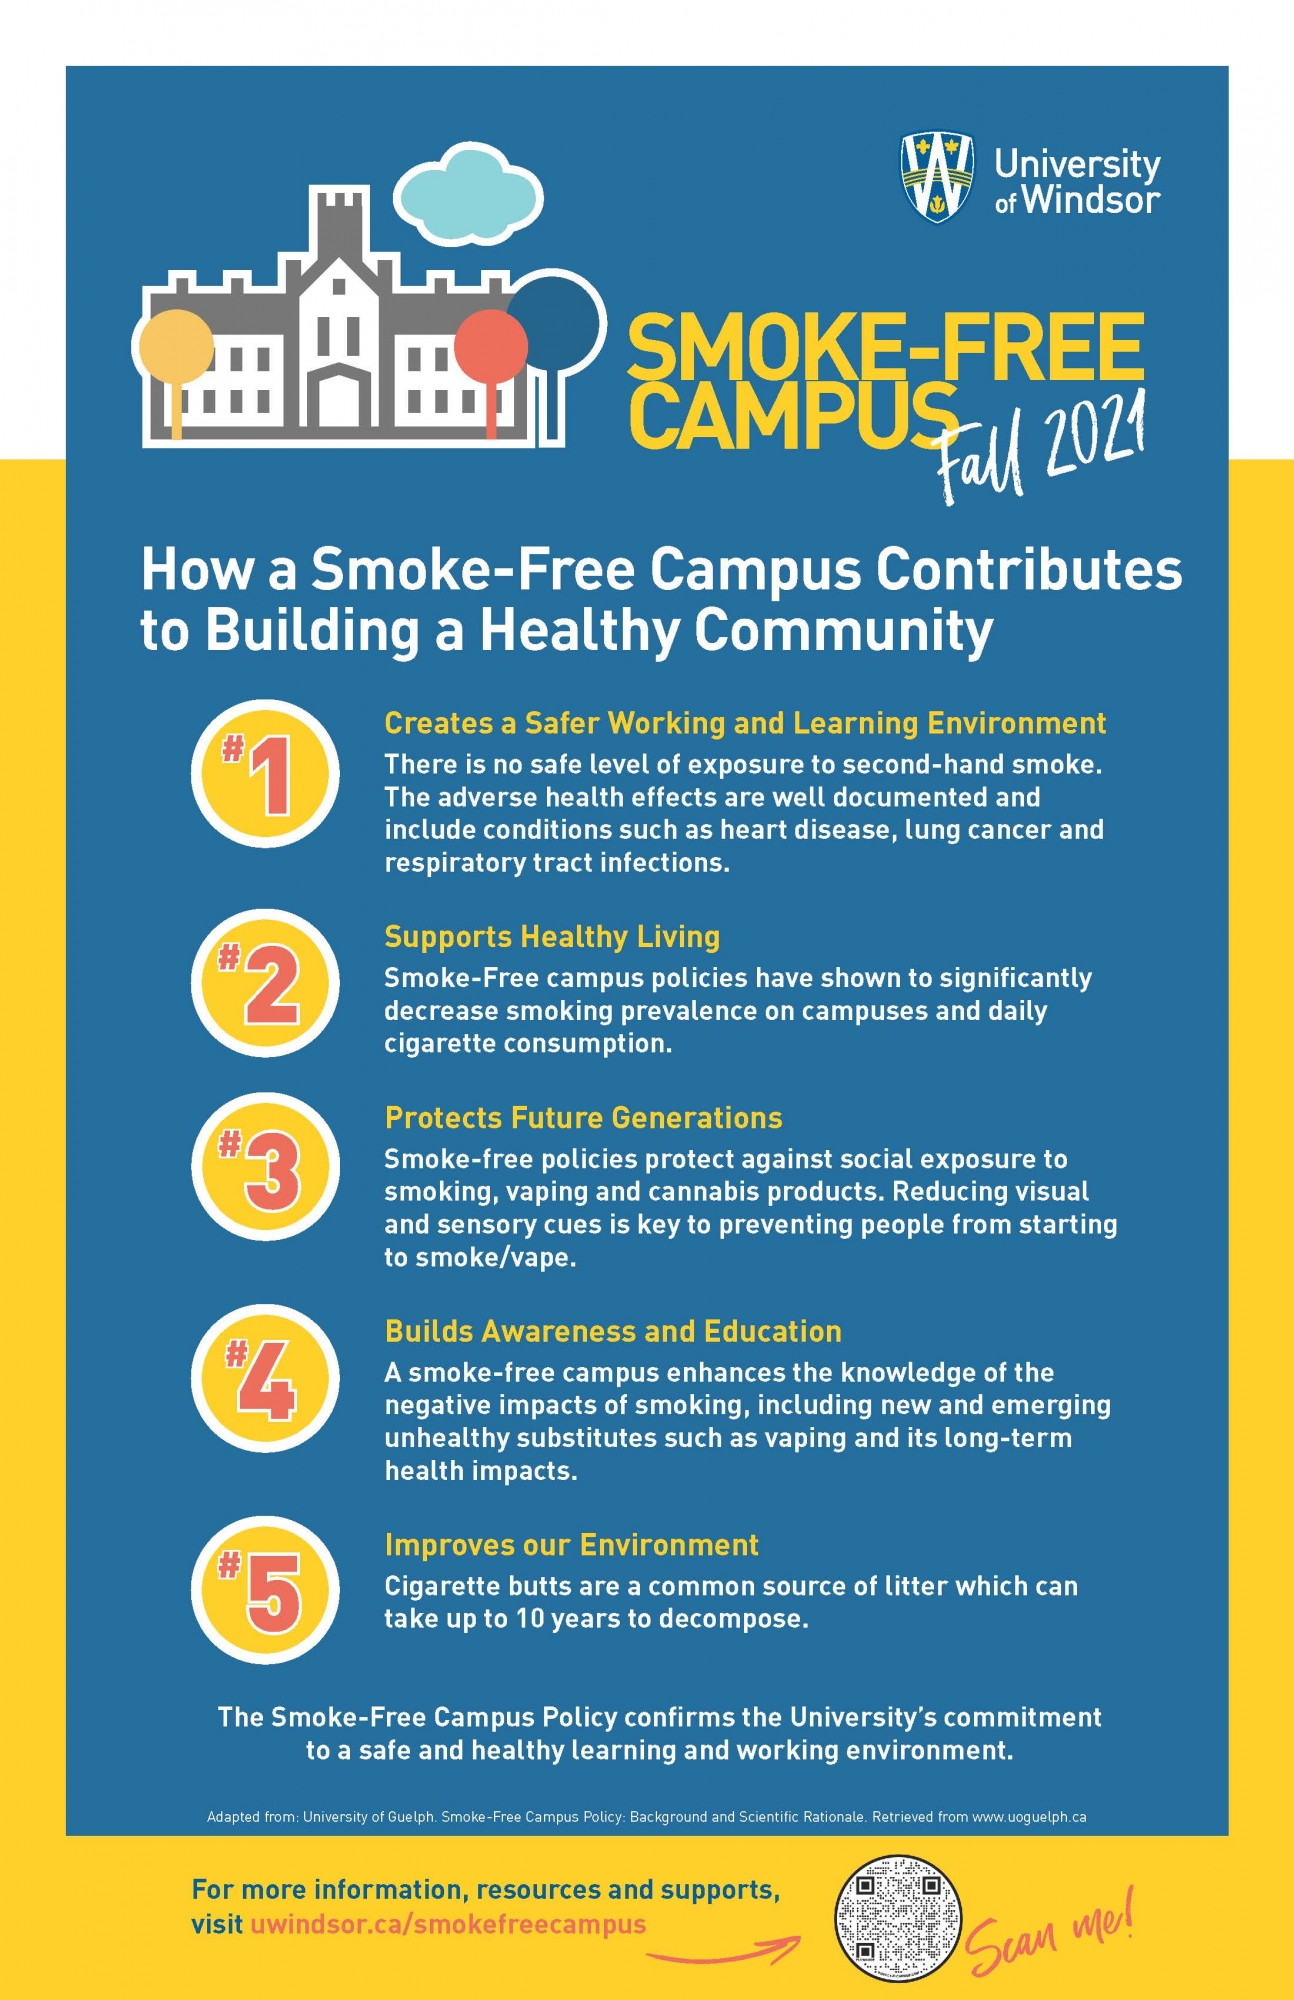 How A Smoke-Free Campus Contributes to Building a Healthy Community